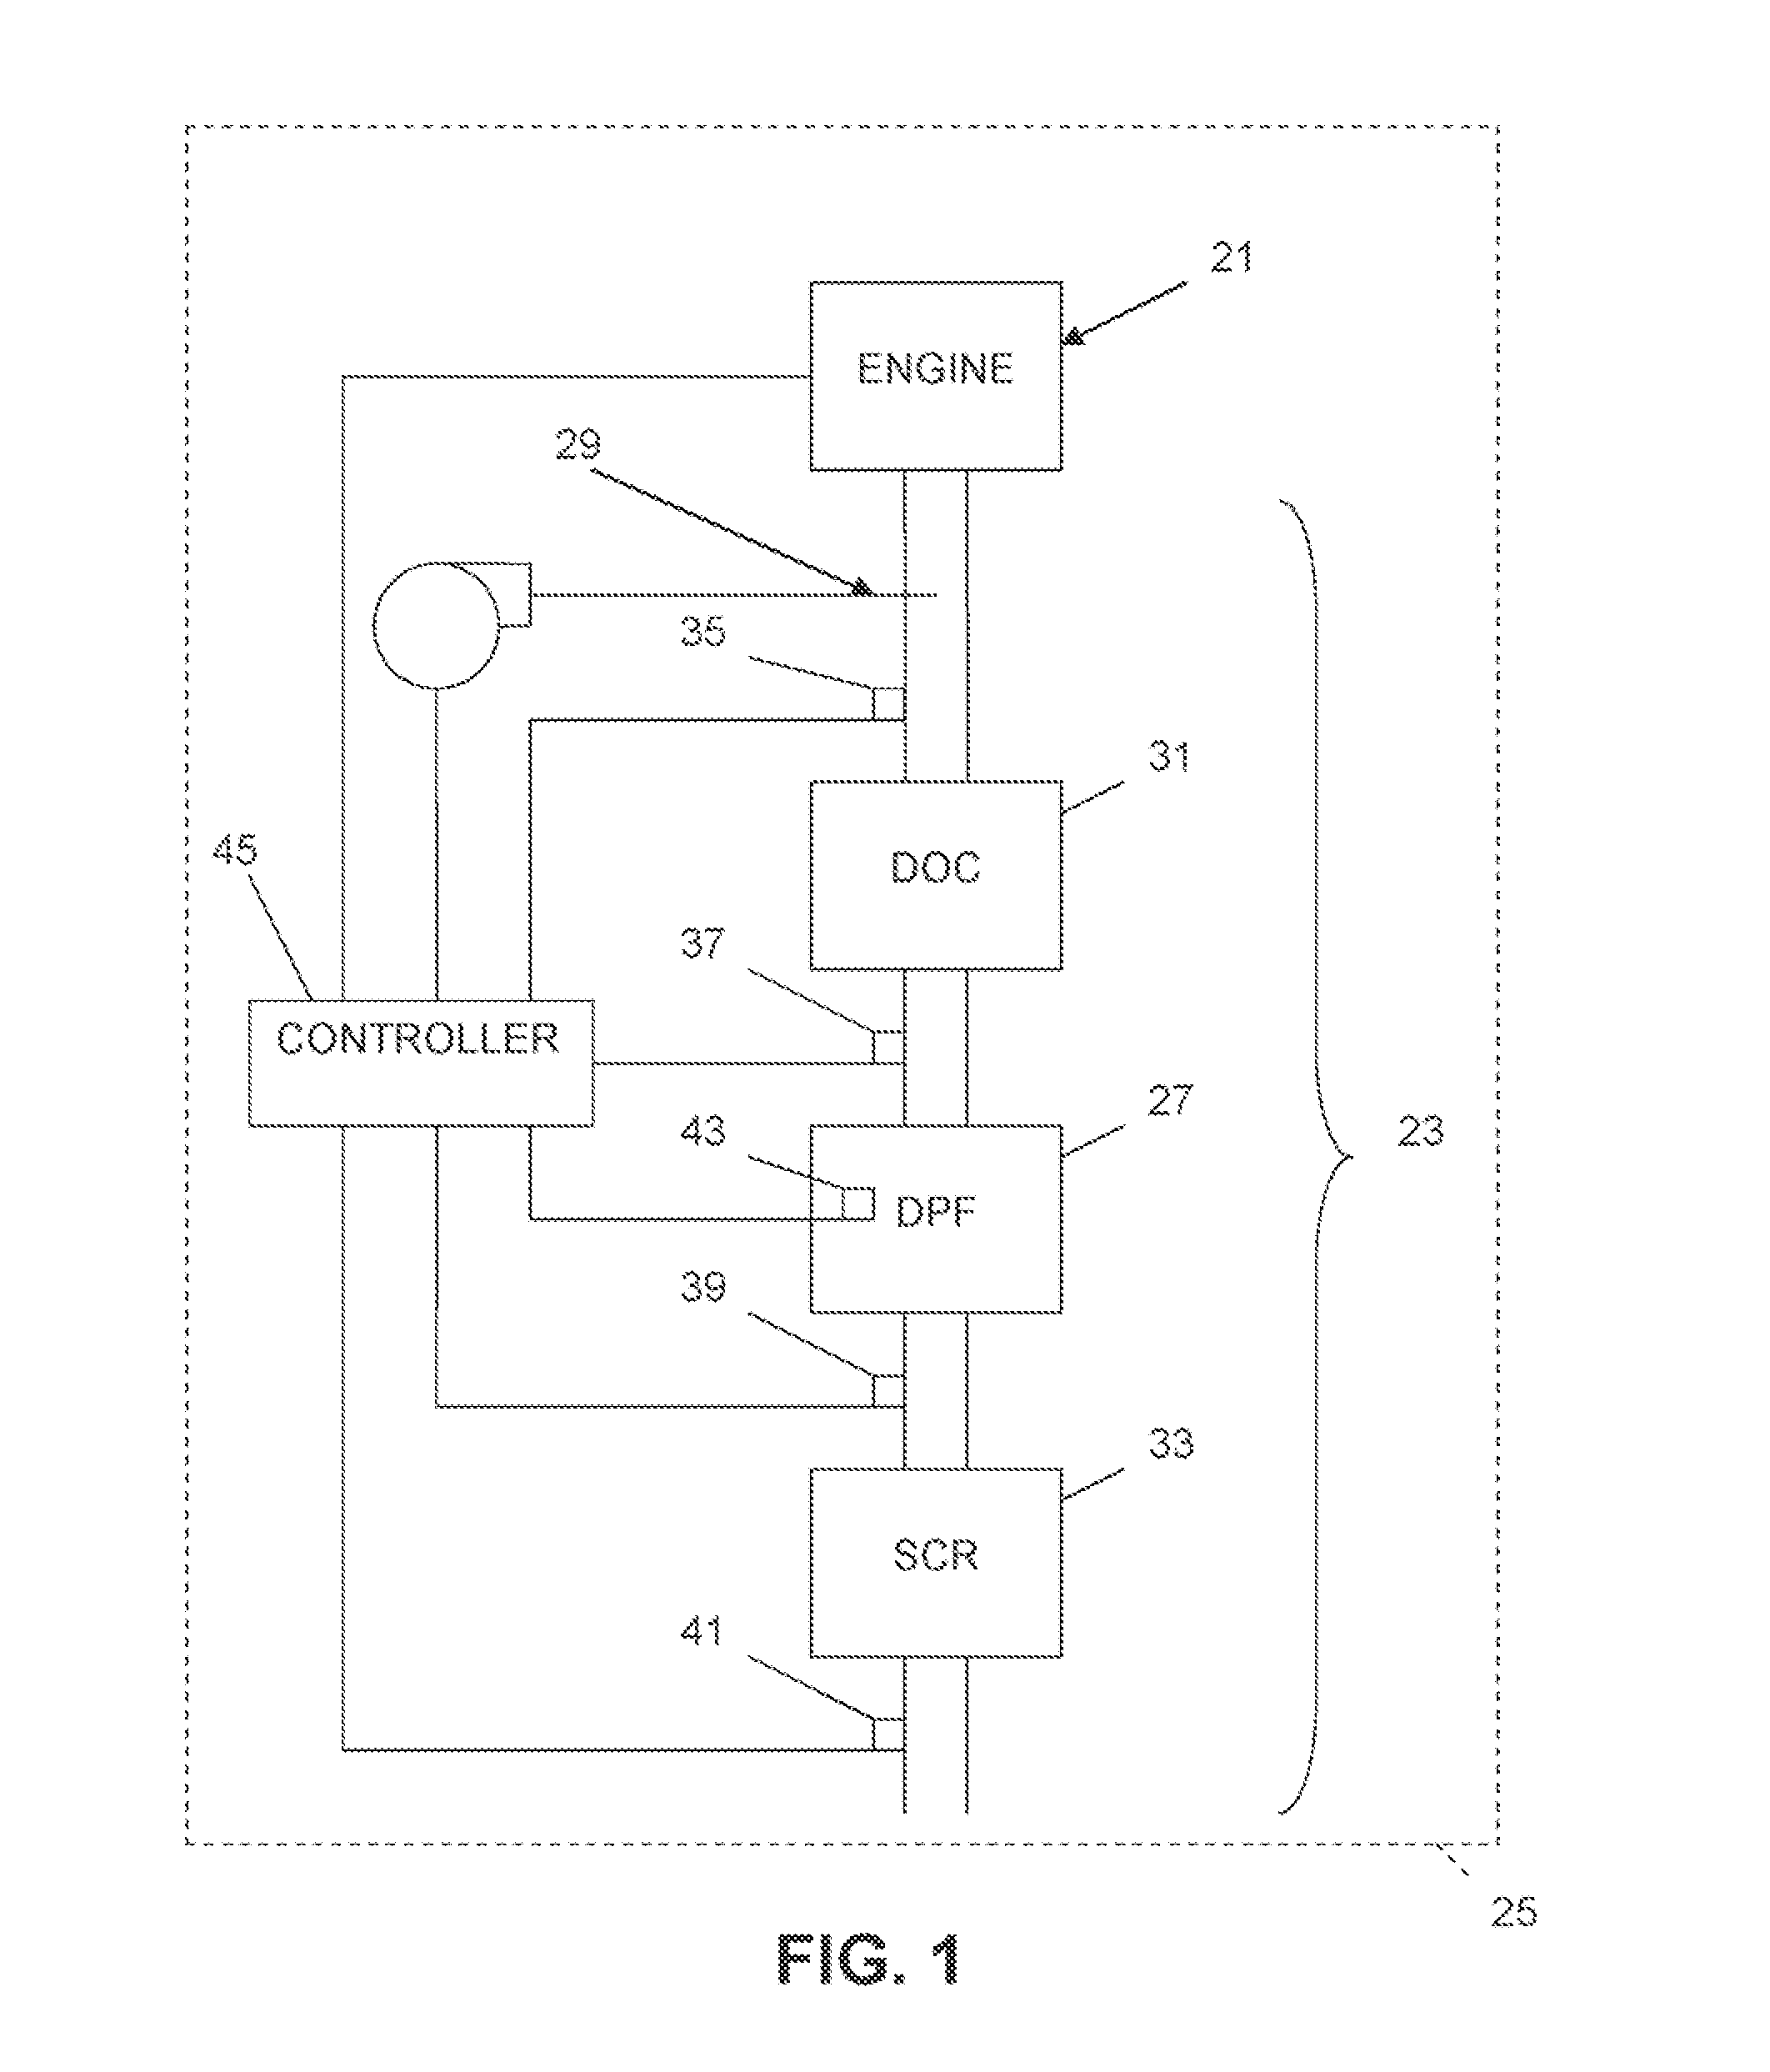 Diesel engine and exhaust aftertreatment system and method of treating exhaust gases from a diesel engine